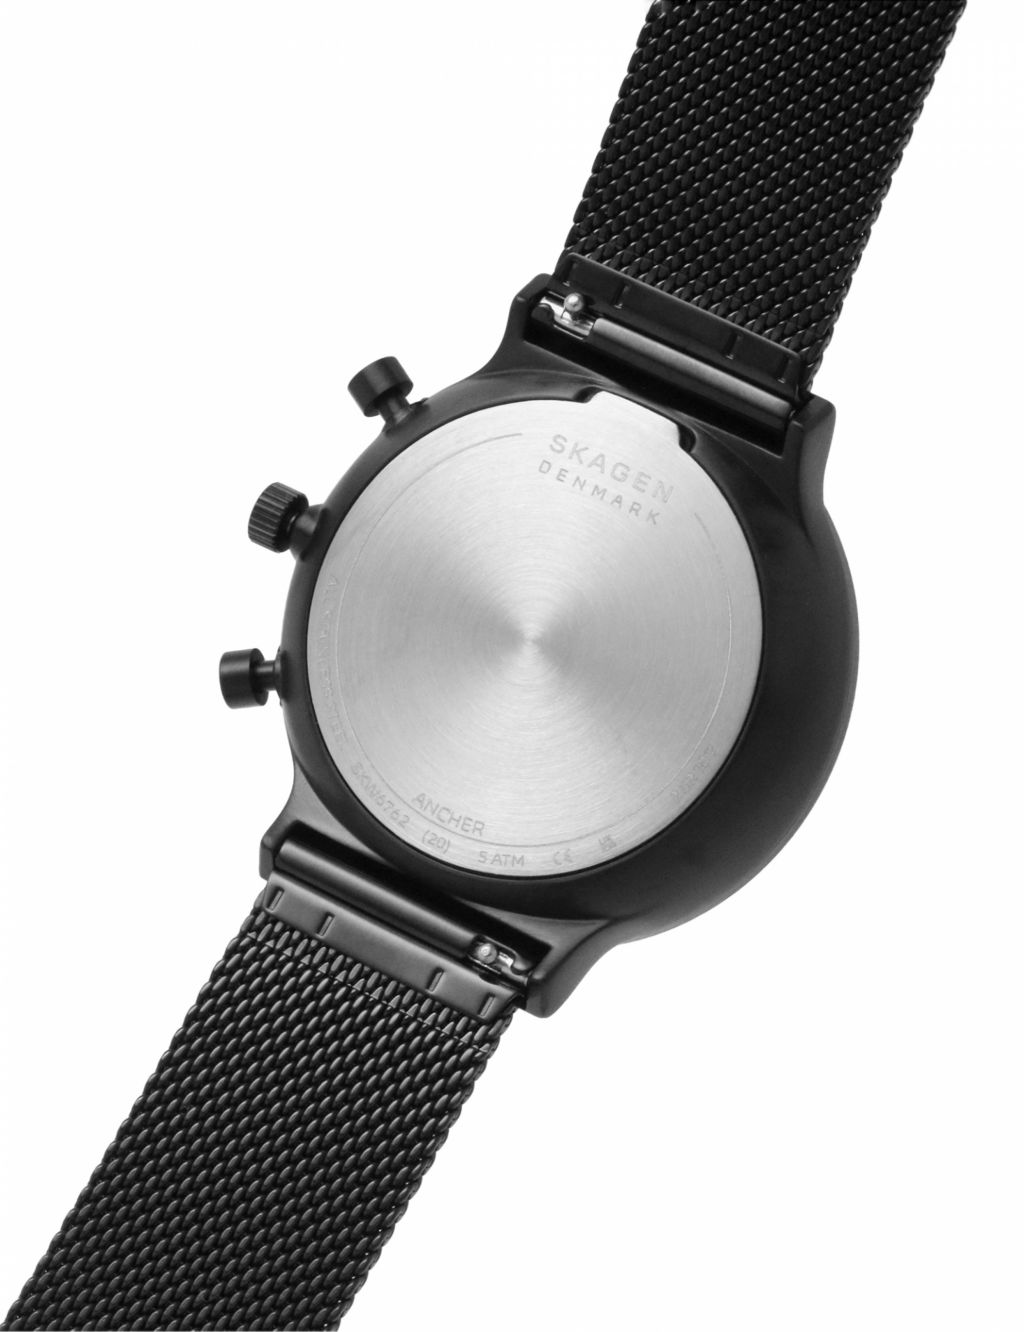 Skagen Anchor Chronograph Black Stainless Steel Watch image 3